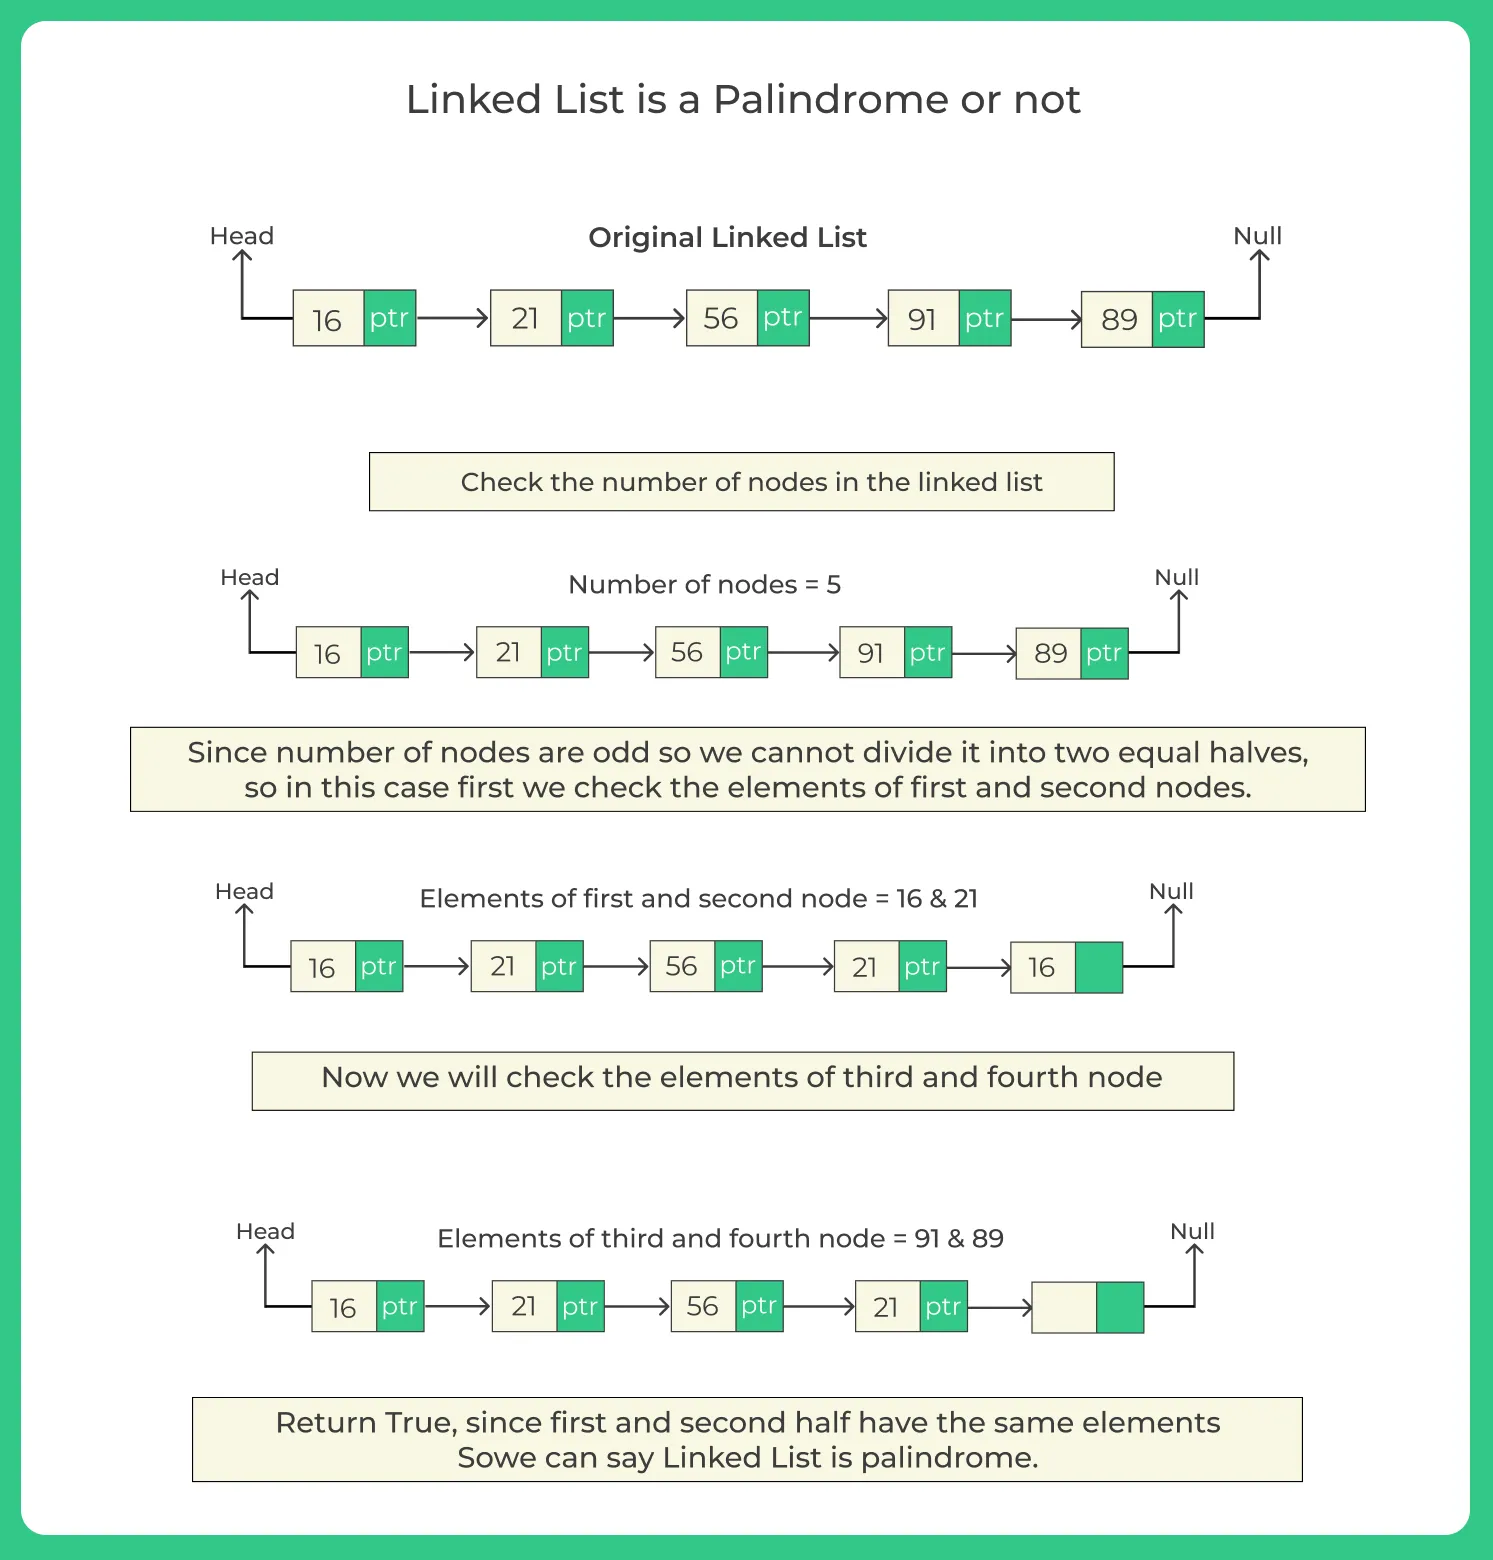 Linked-List-is-a-Palindrome-or-not